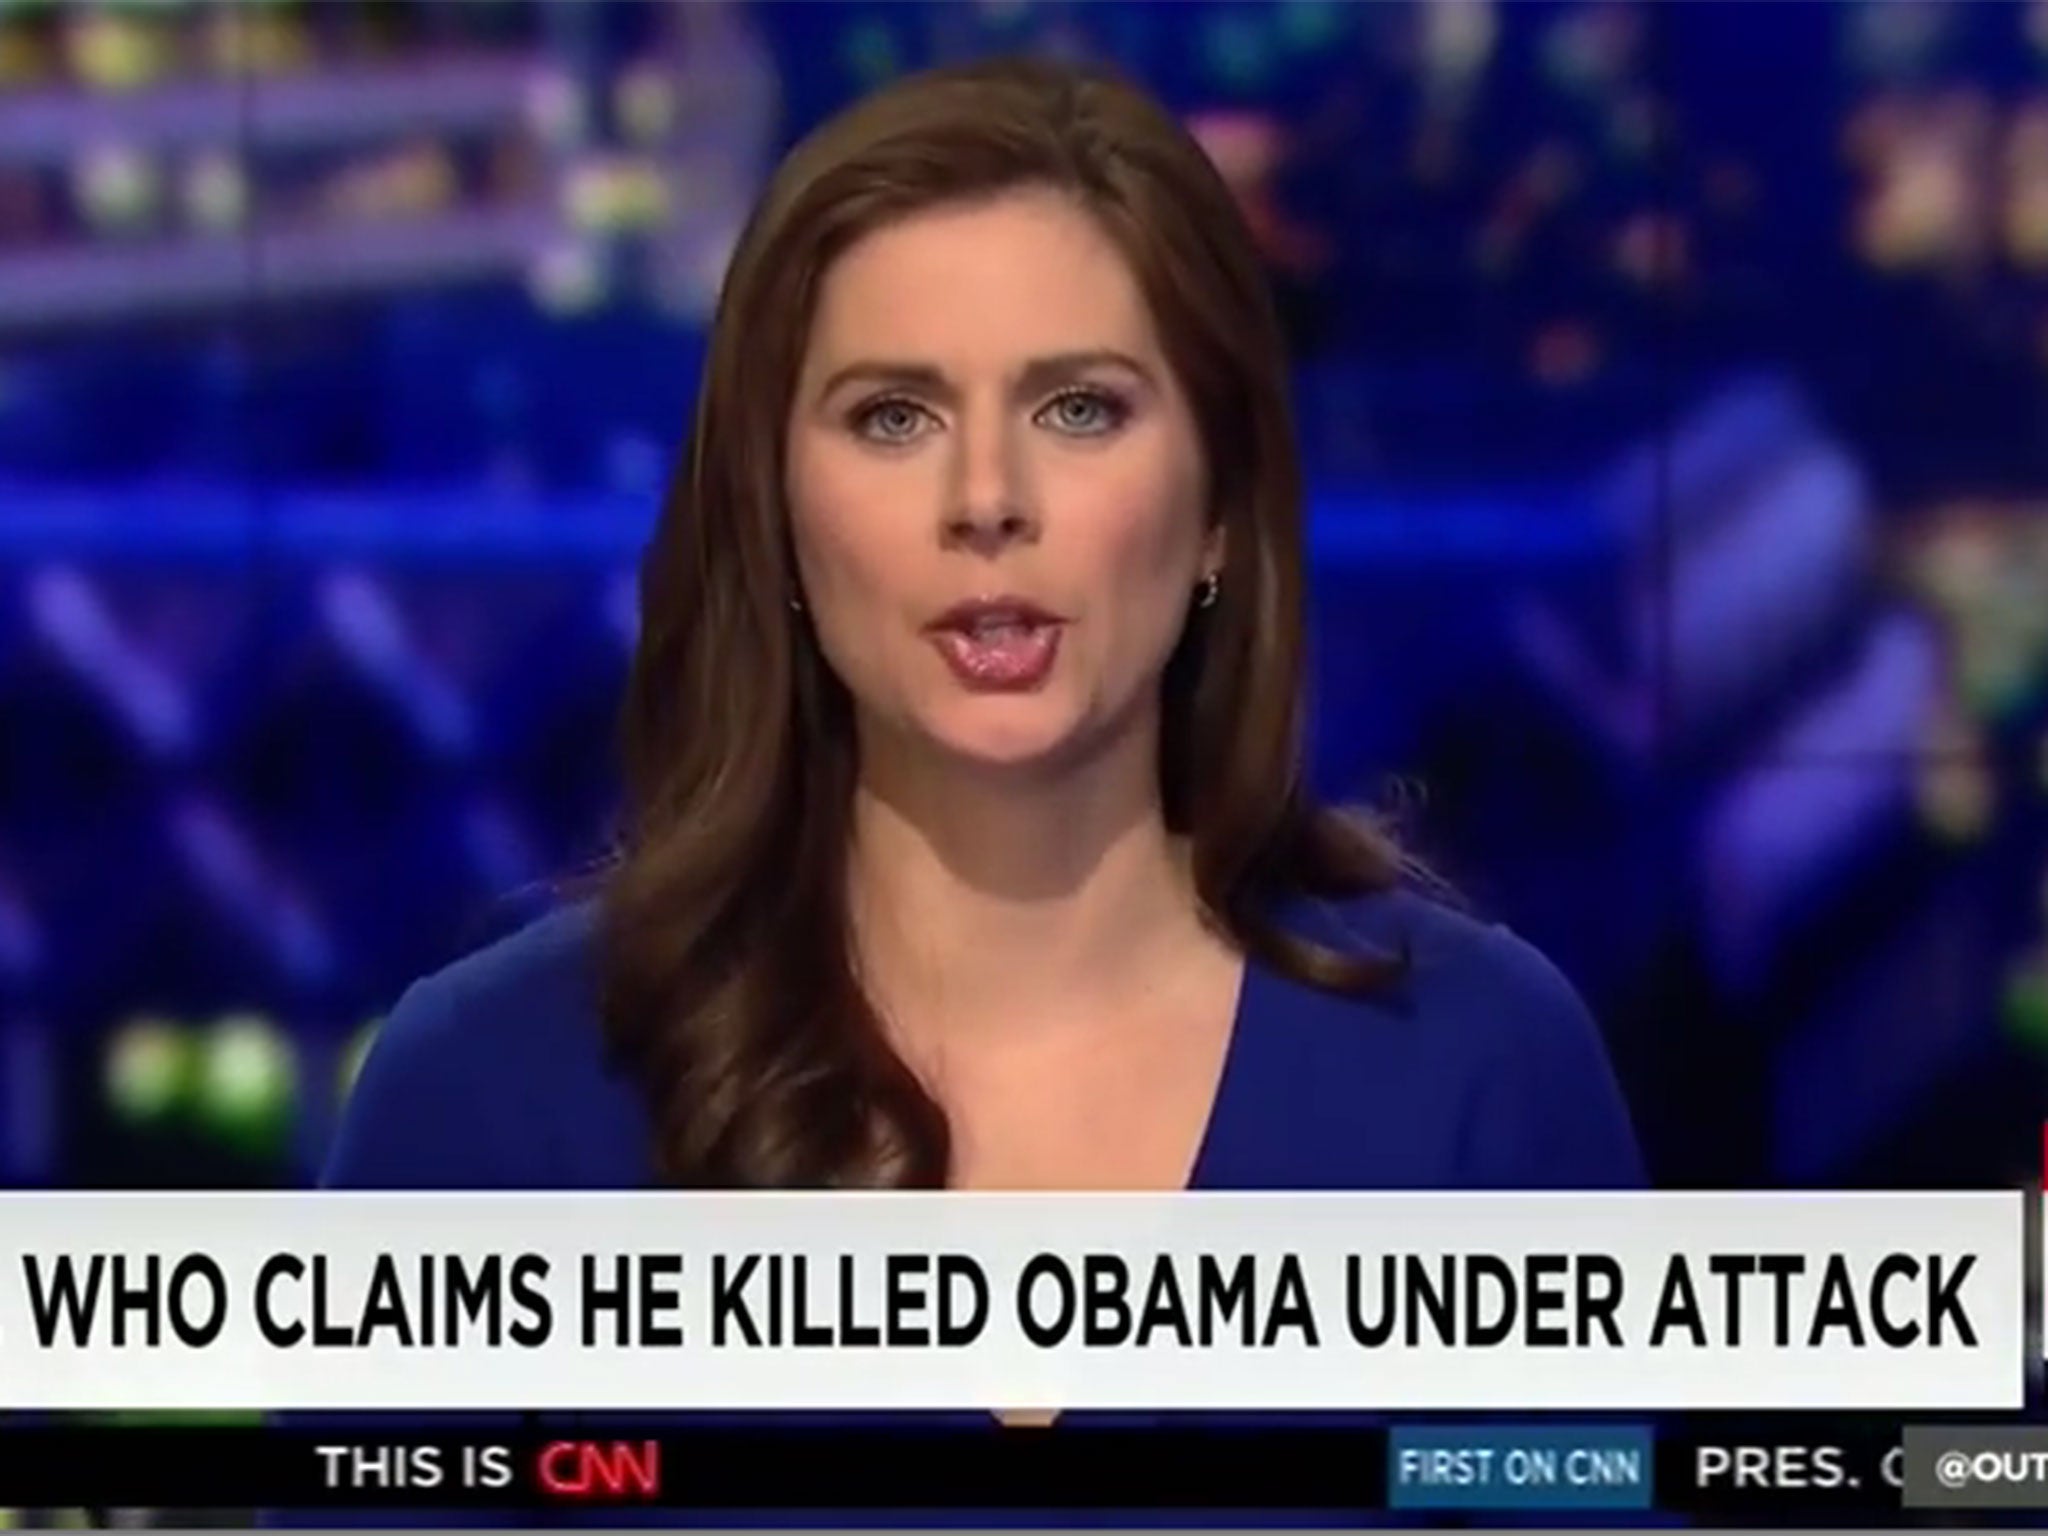 The mistake was broadcast for a full 50 seconds on CNN before it could be corrected